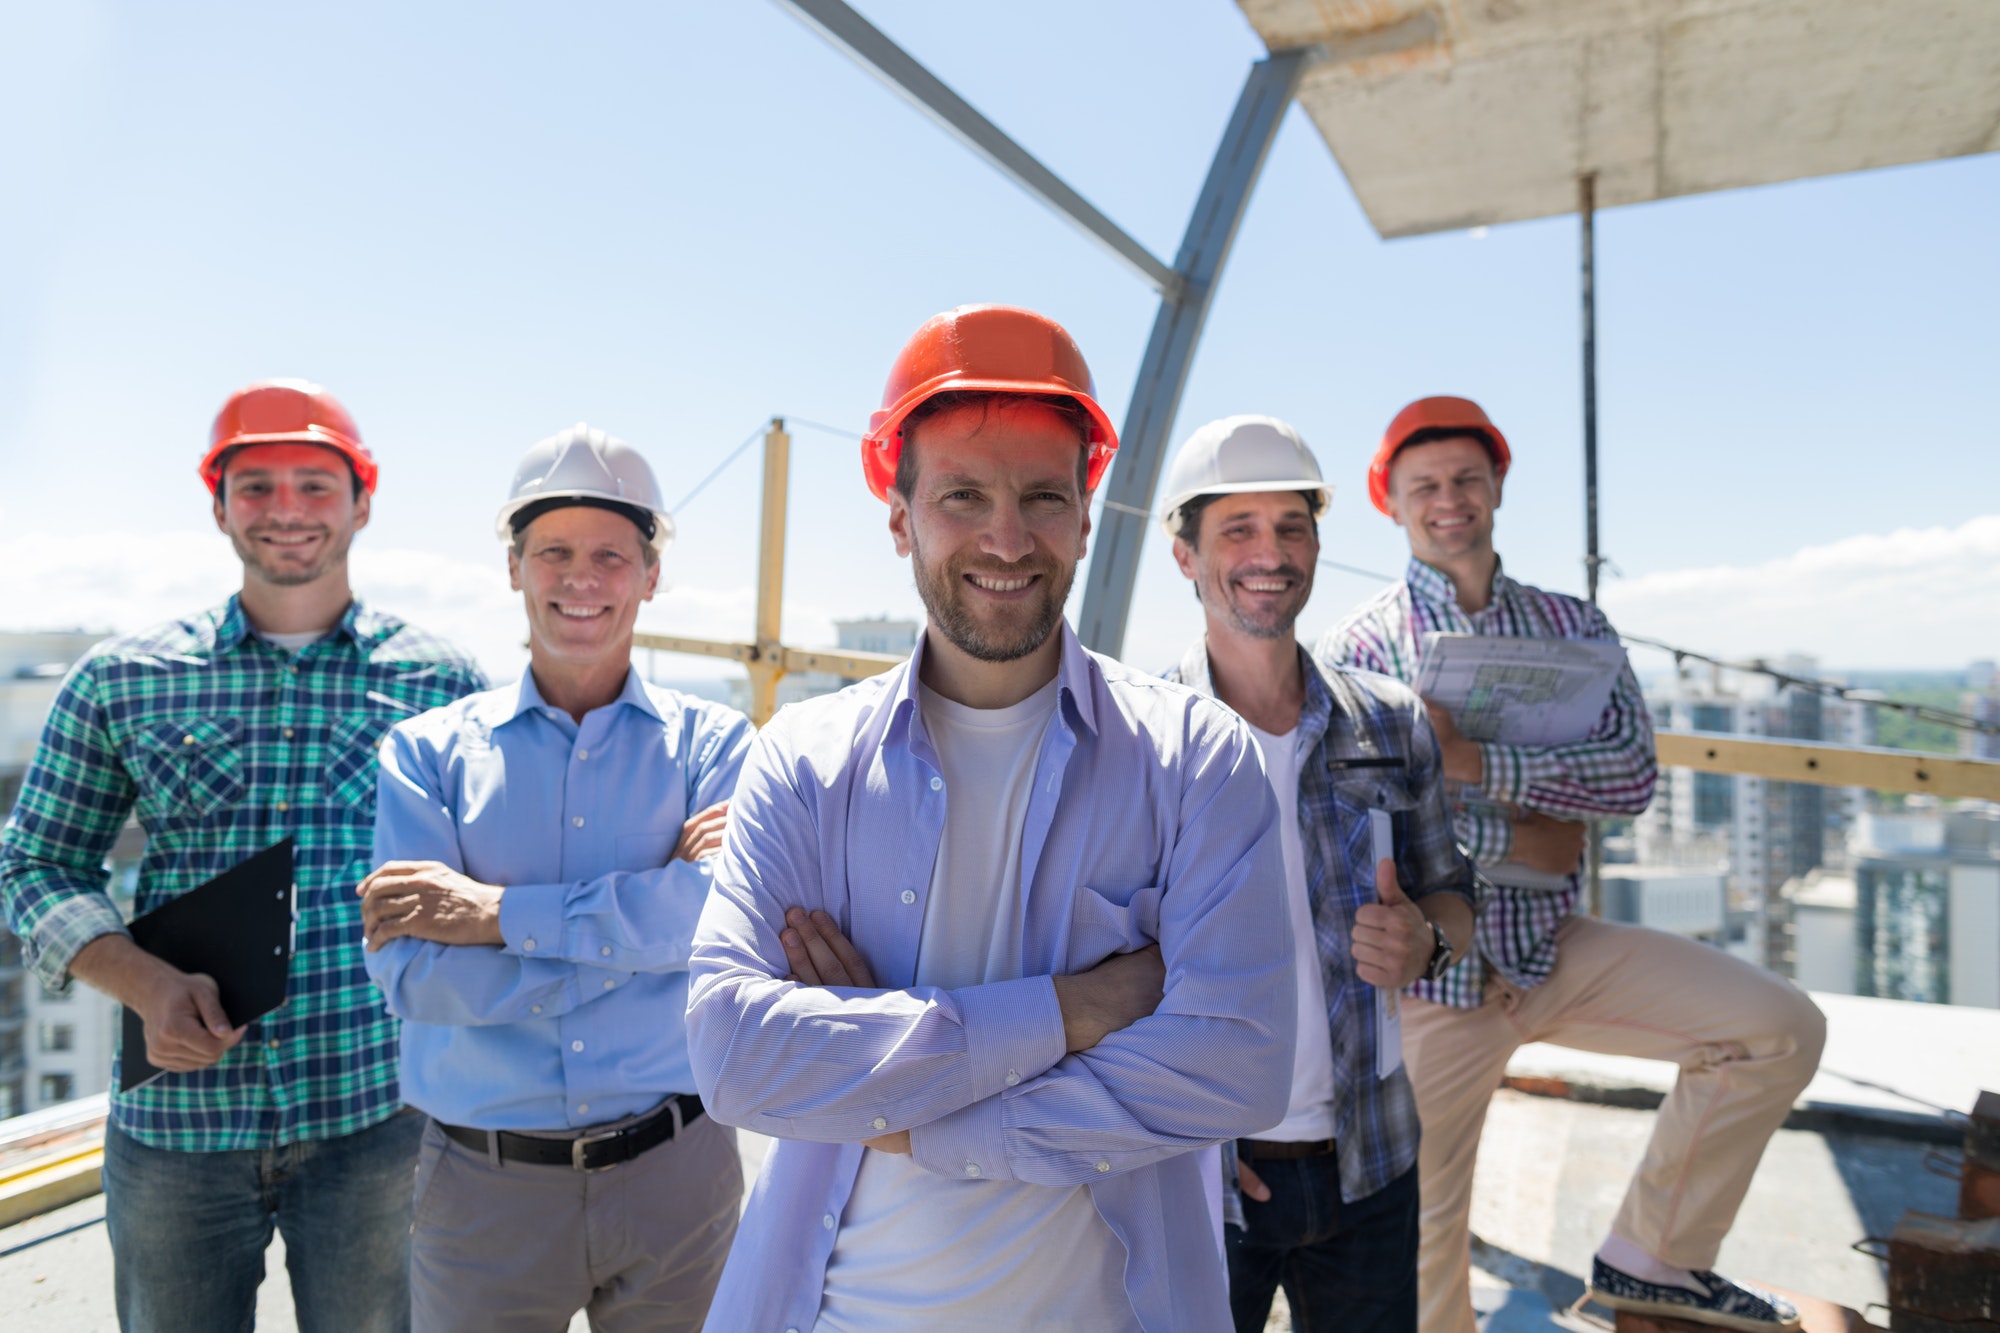 Builders Team Leader Over Group Of Apprentices At Construction Site, Happy Smiling Engineers